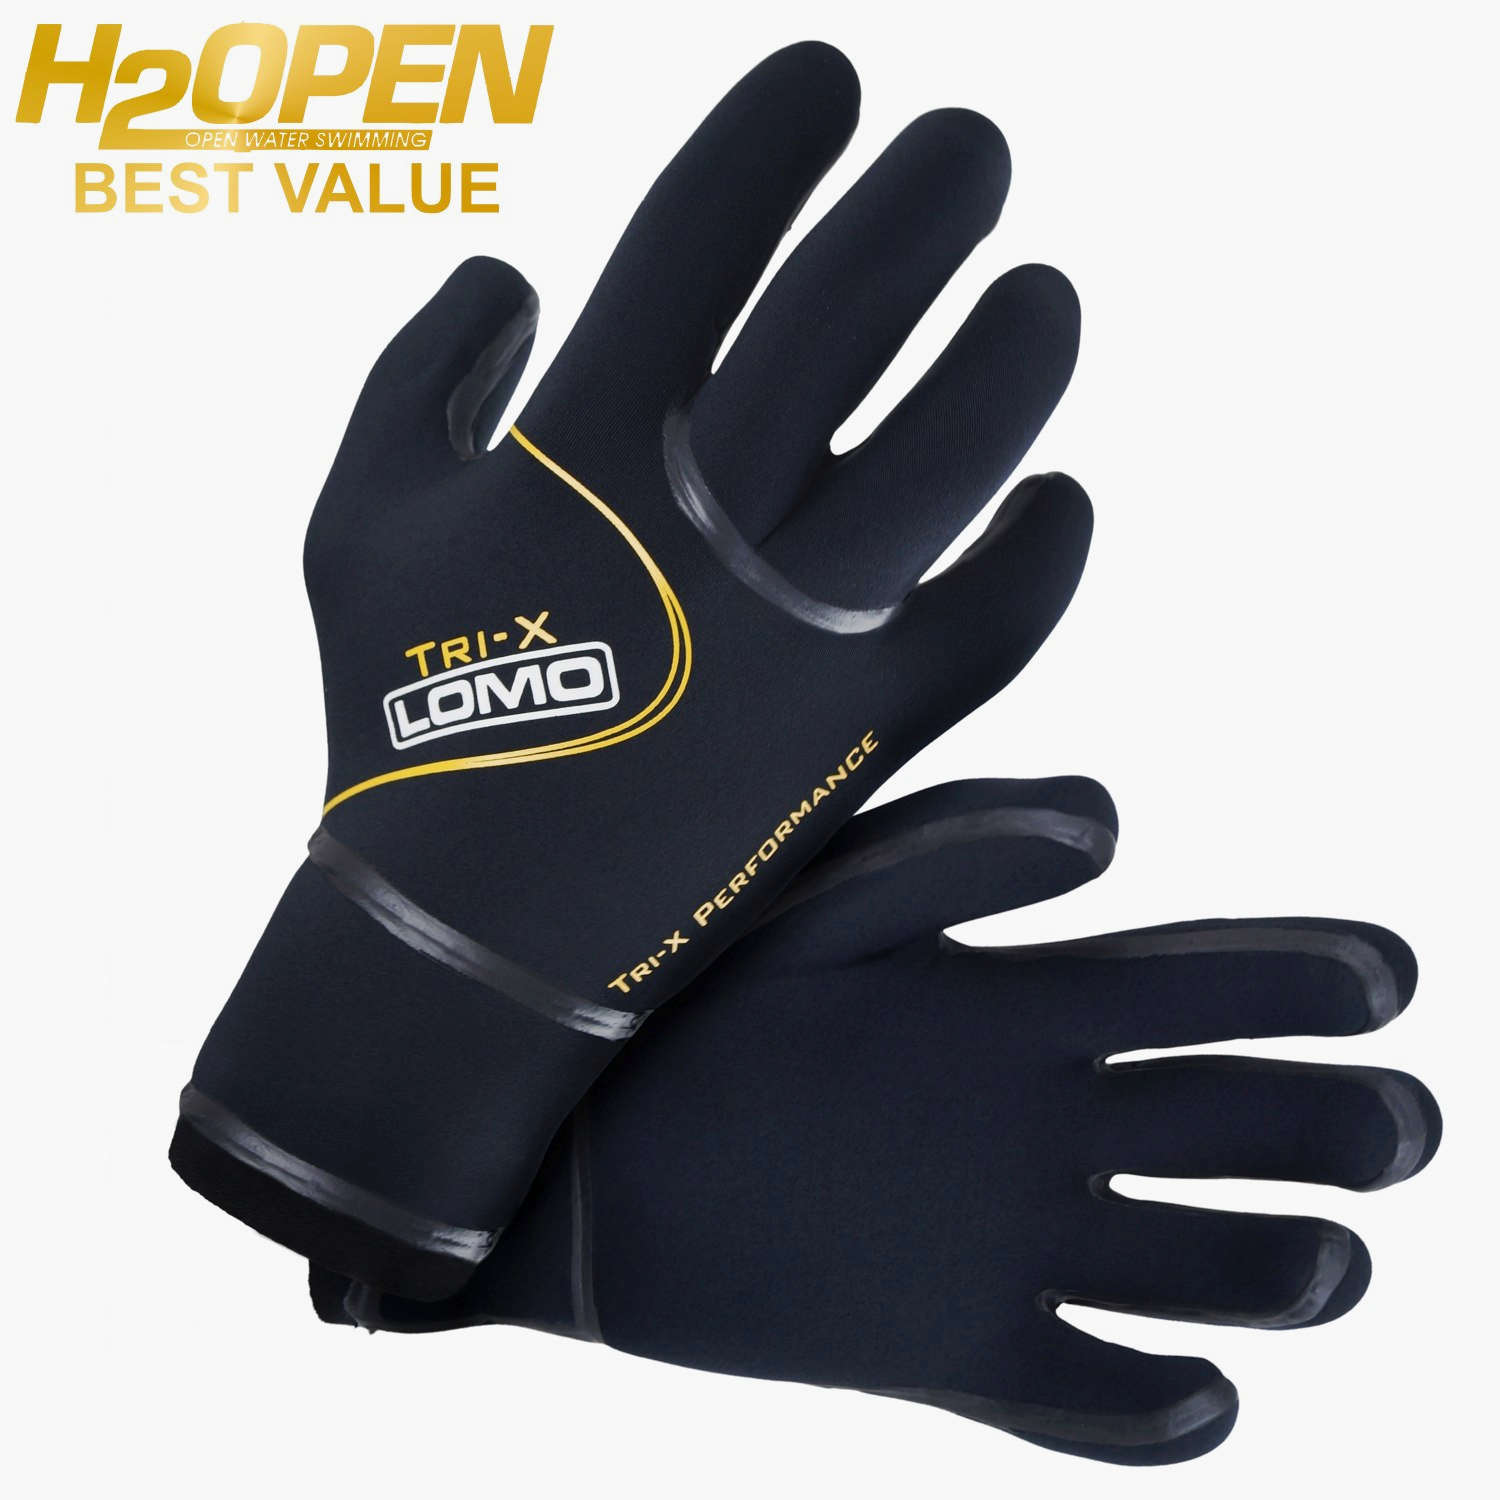 Swimming and Triathlon Gloves  Lomo Watersport UK. Wetsuits, Dry Bags &  Outdoor Gear.